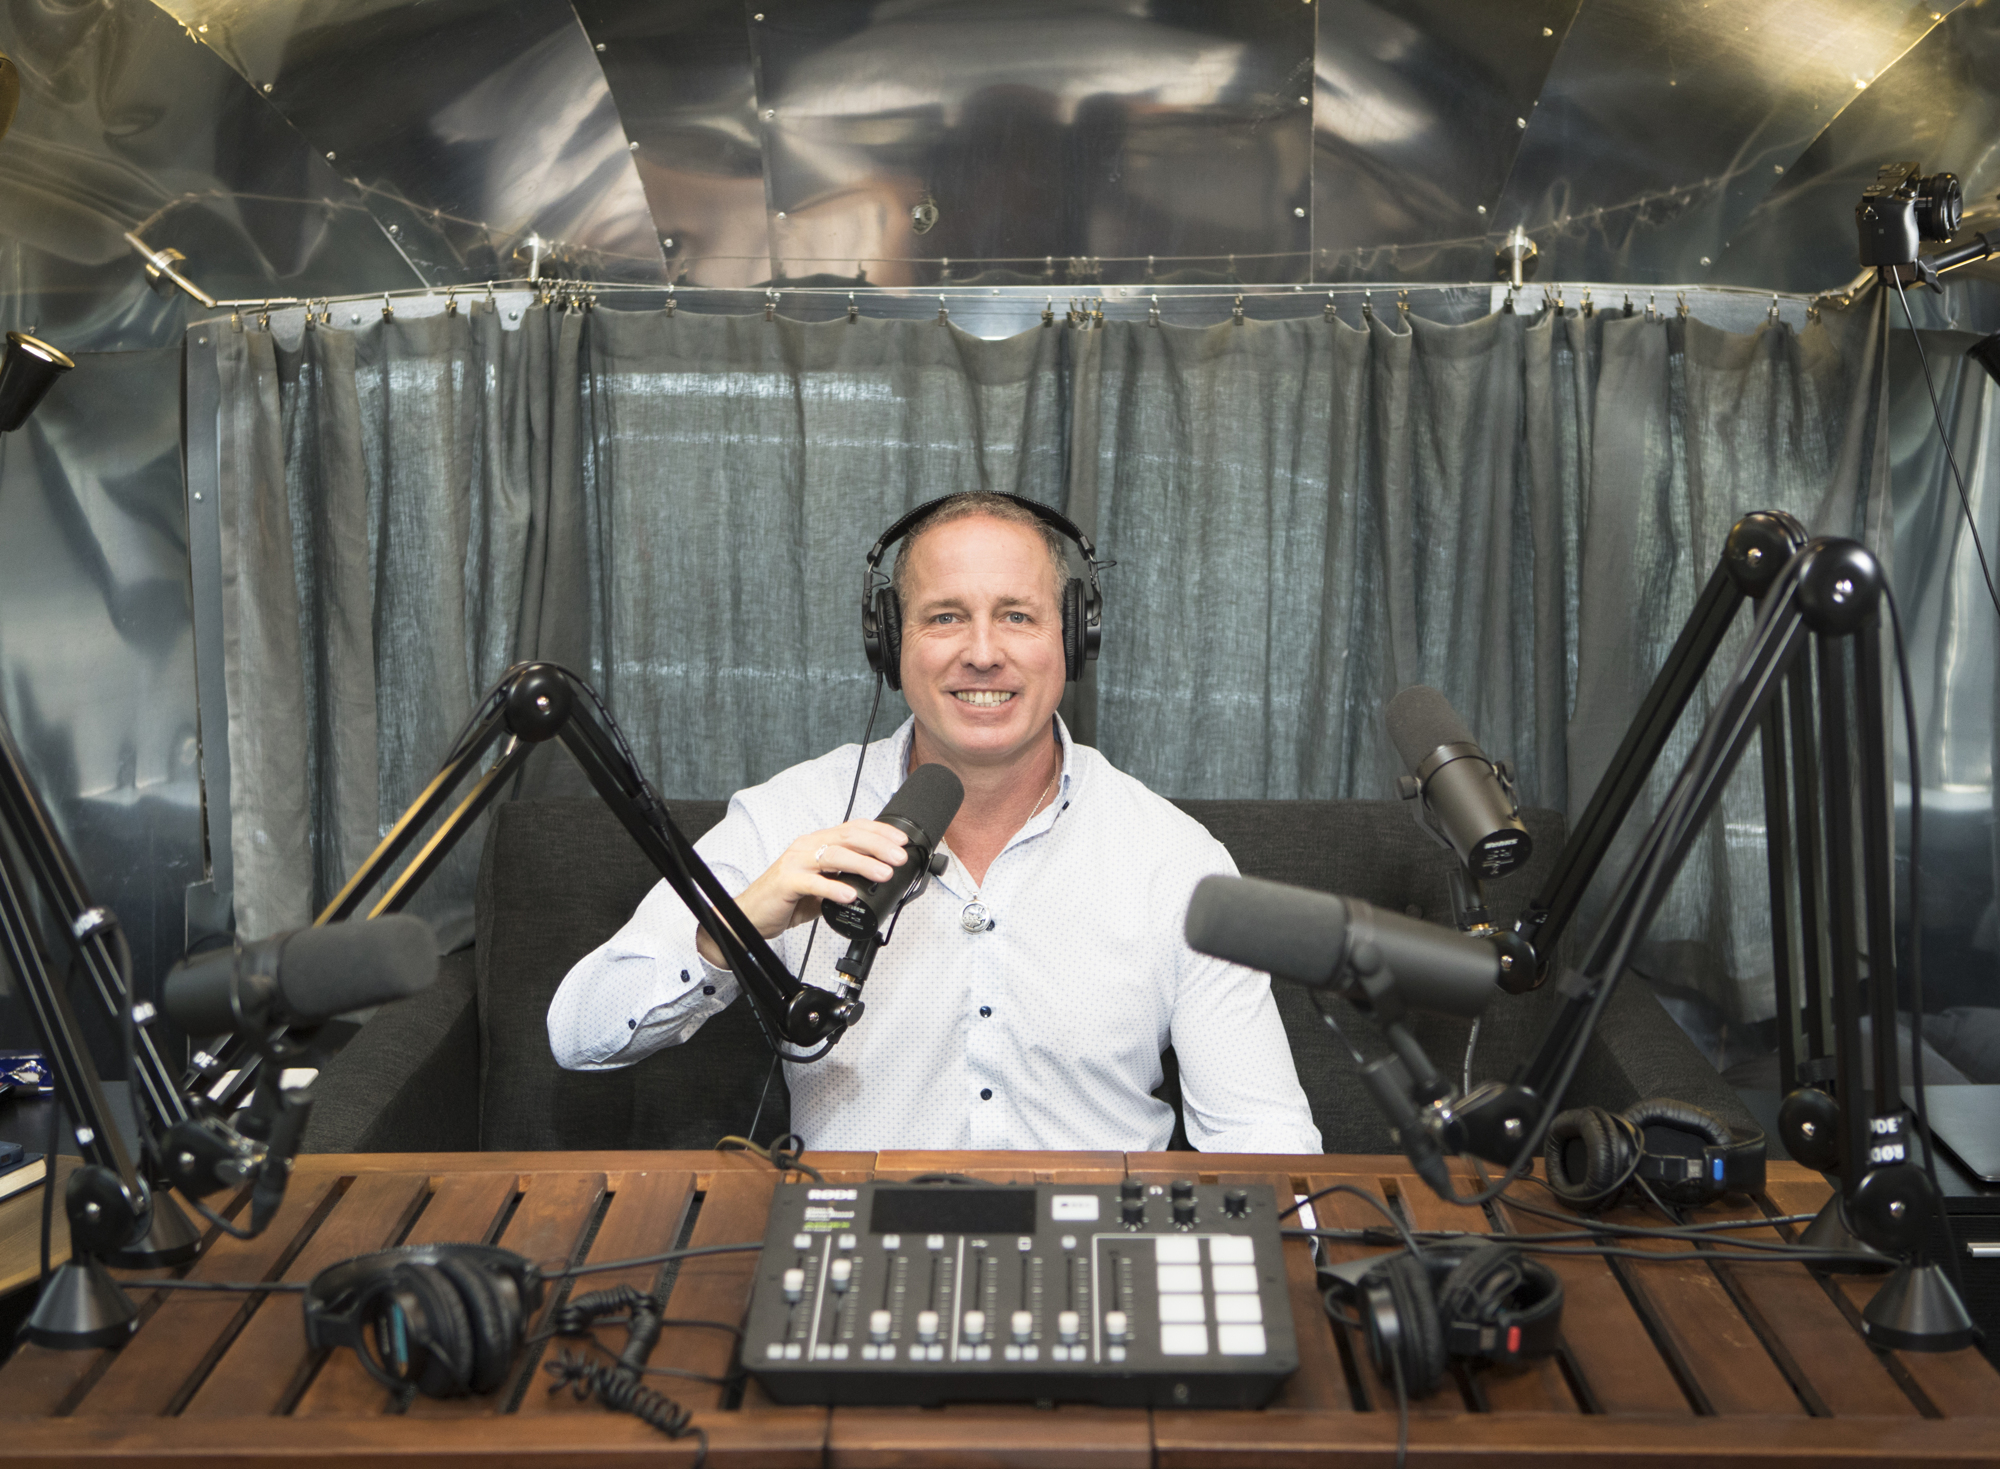 Mark Wemple. Matt Hoffman recently launched a virtual business, including a podcast recorded in a retrofitted Airstream, out of his new book, “Kickass Husband: Winning at Life, Marriage and Sex.”